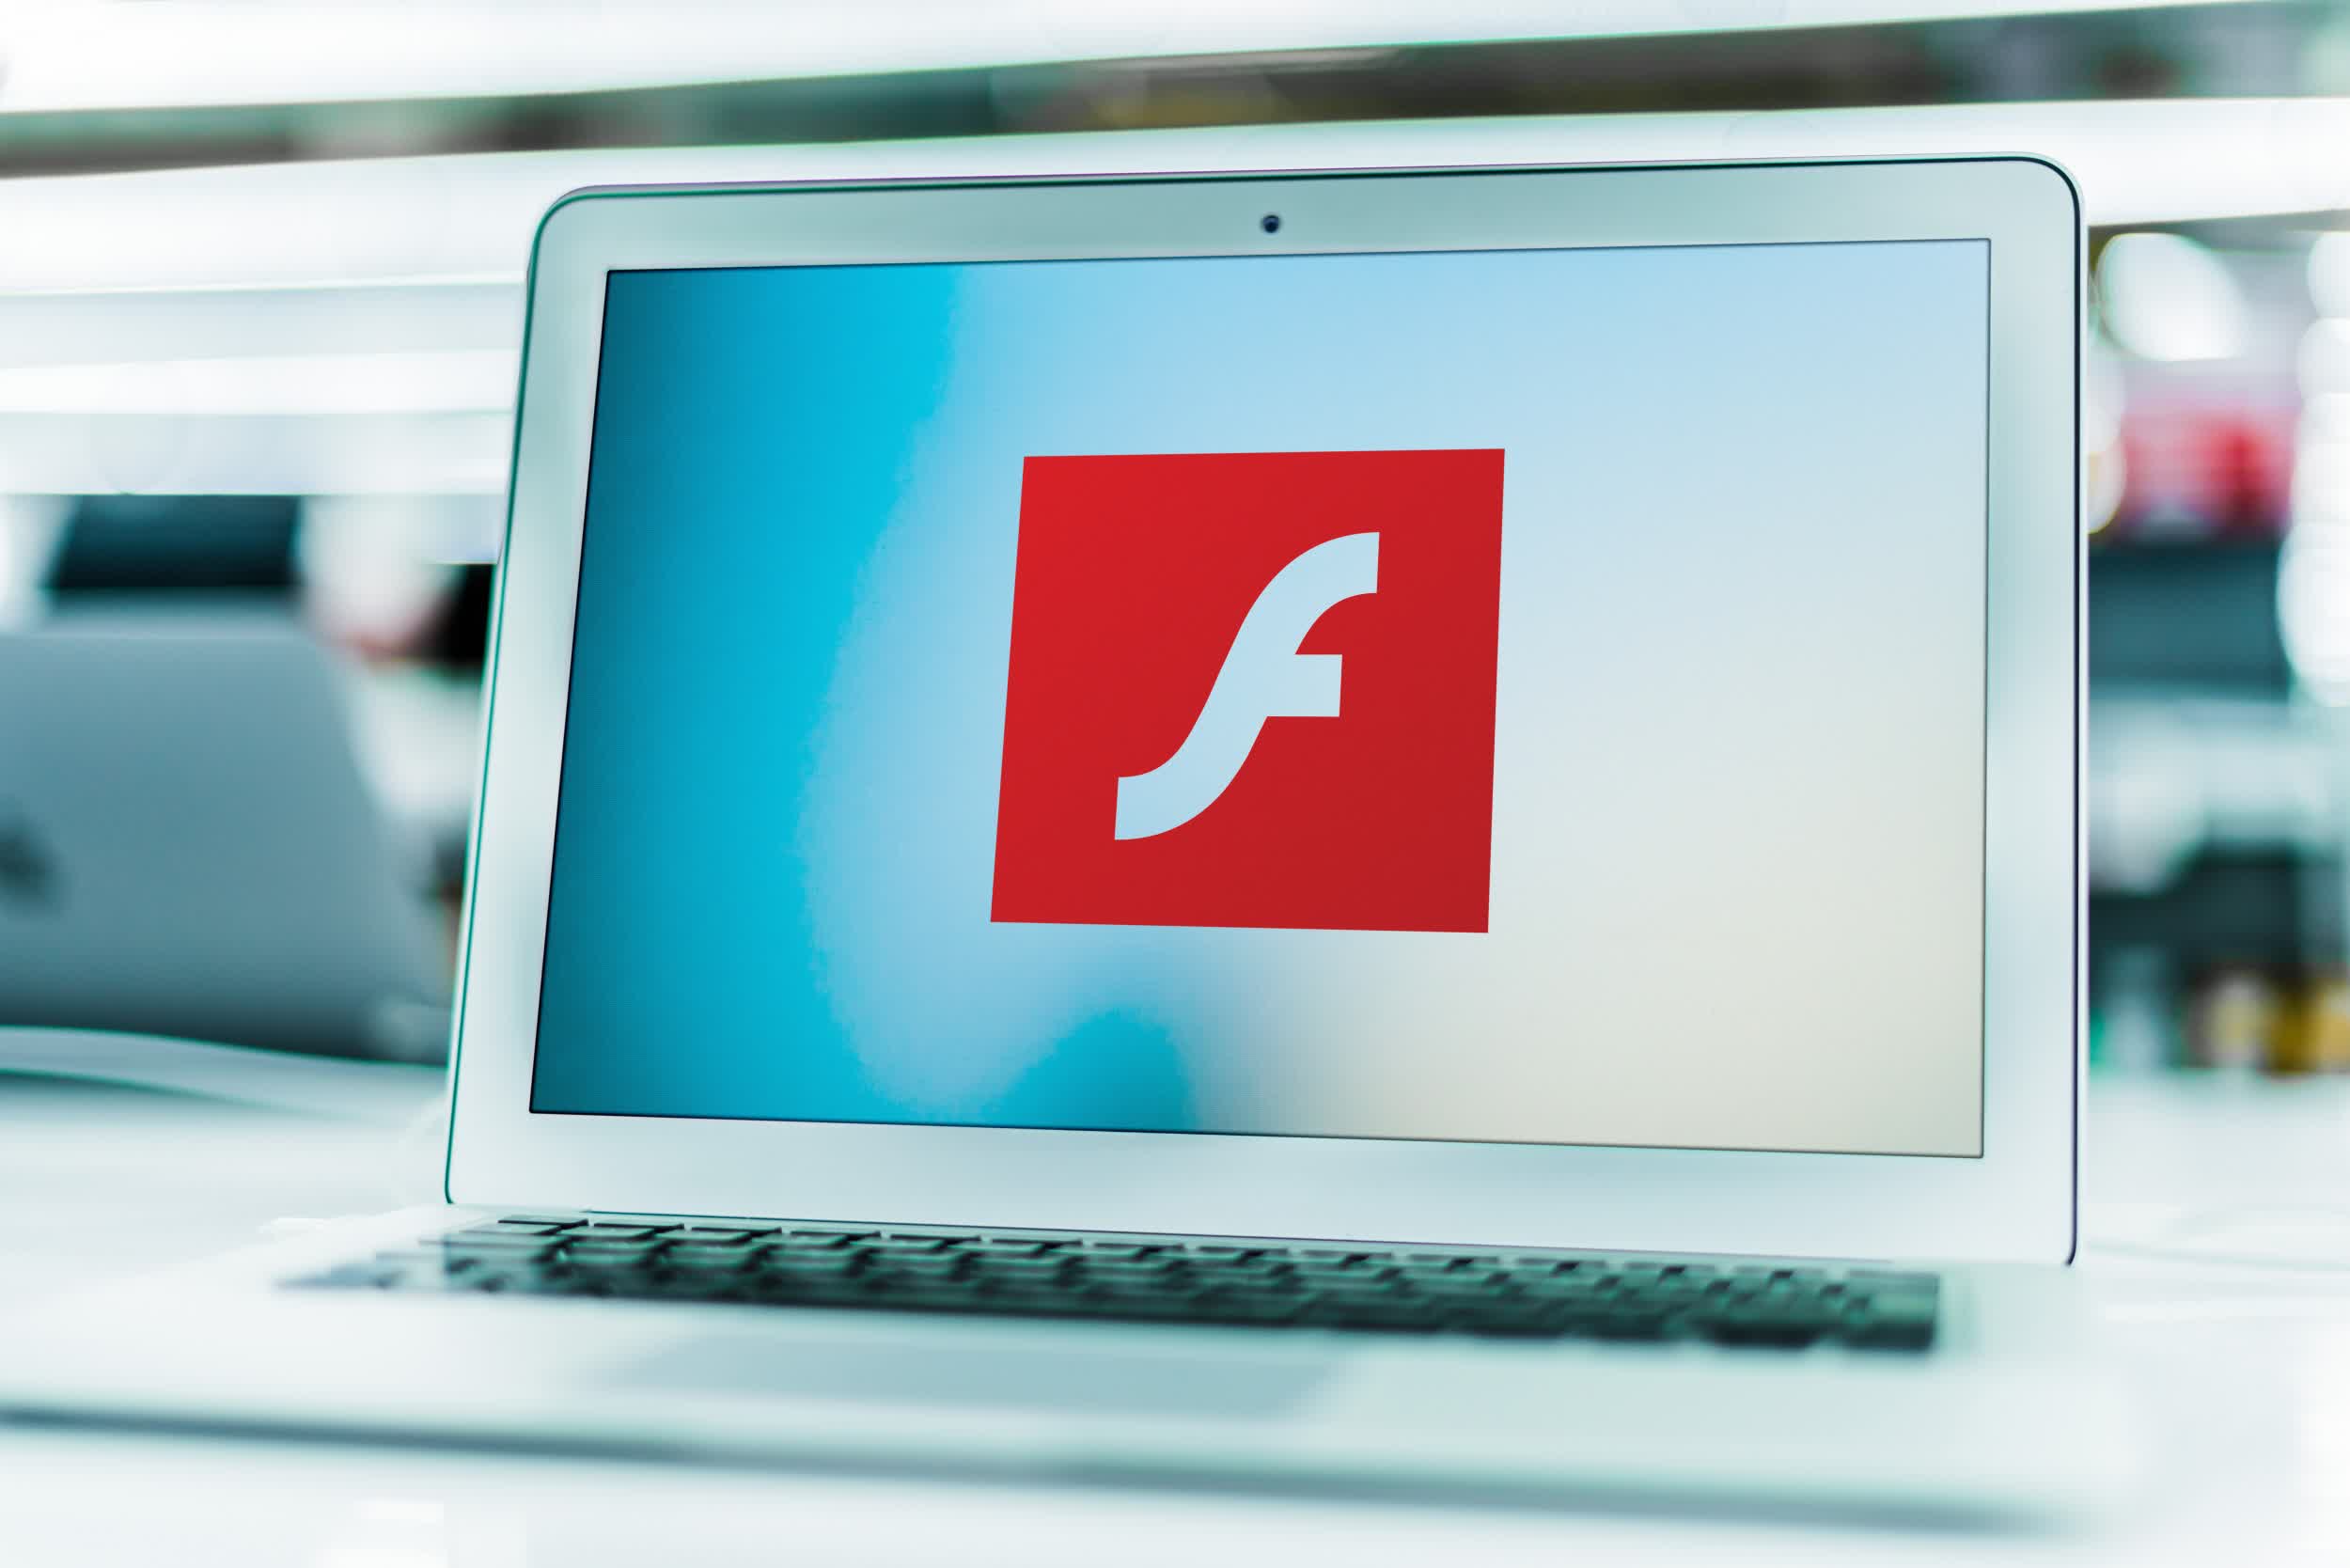 Microsoft will fully remove Adobe Flash from Windows 10 in July